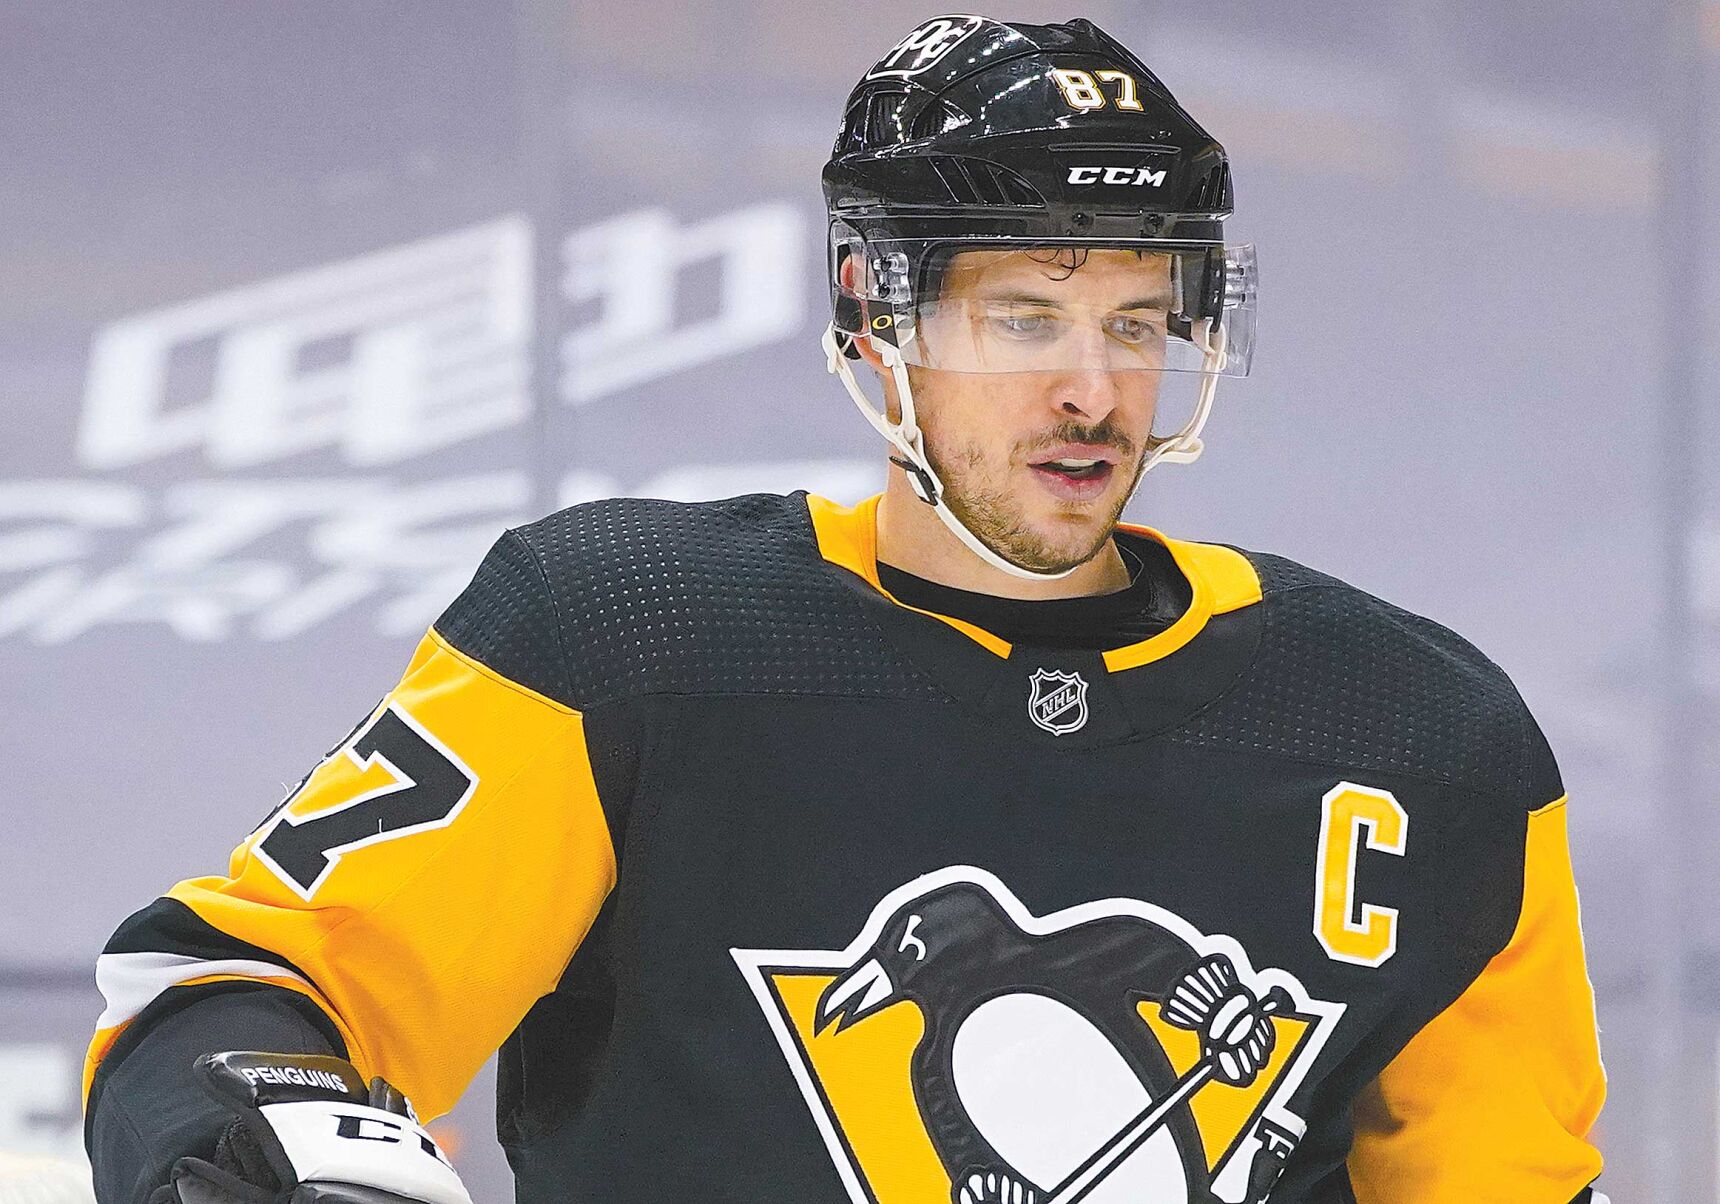 Penguins Crosby to play in 1,000th NHL game today National Sports thederrick